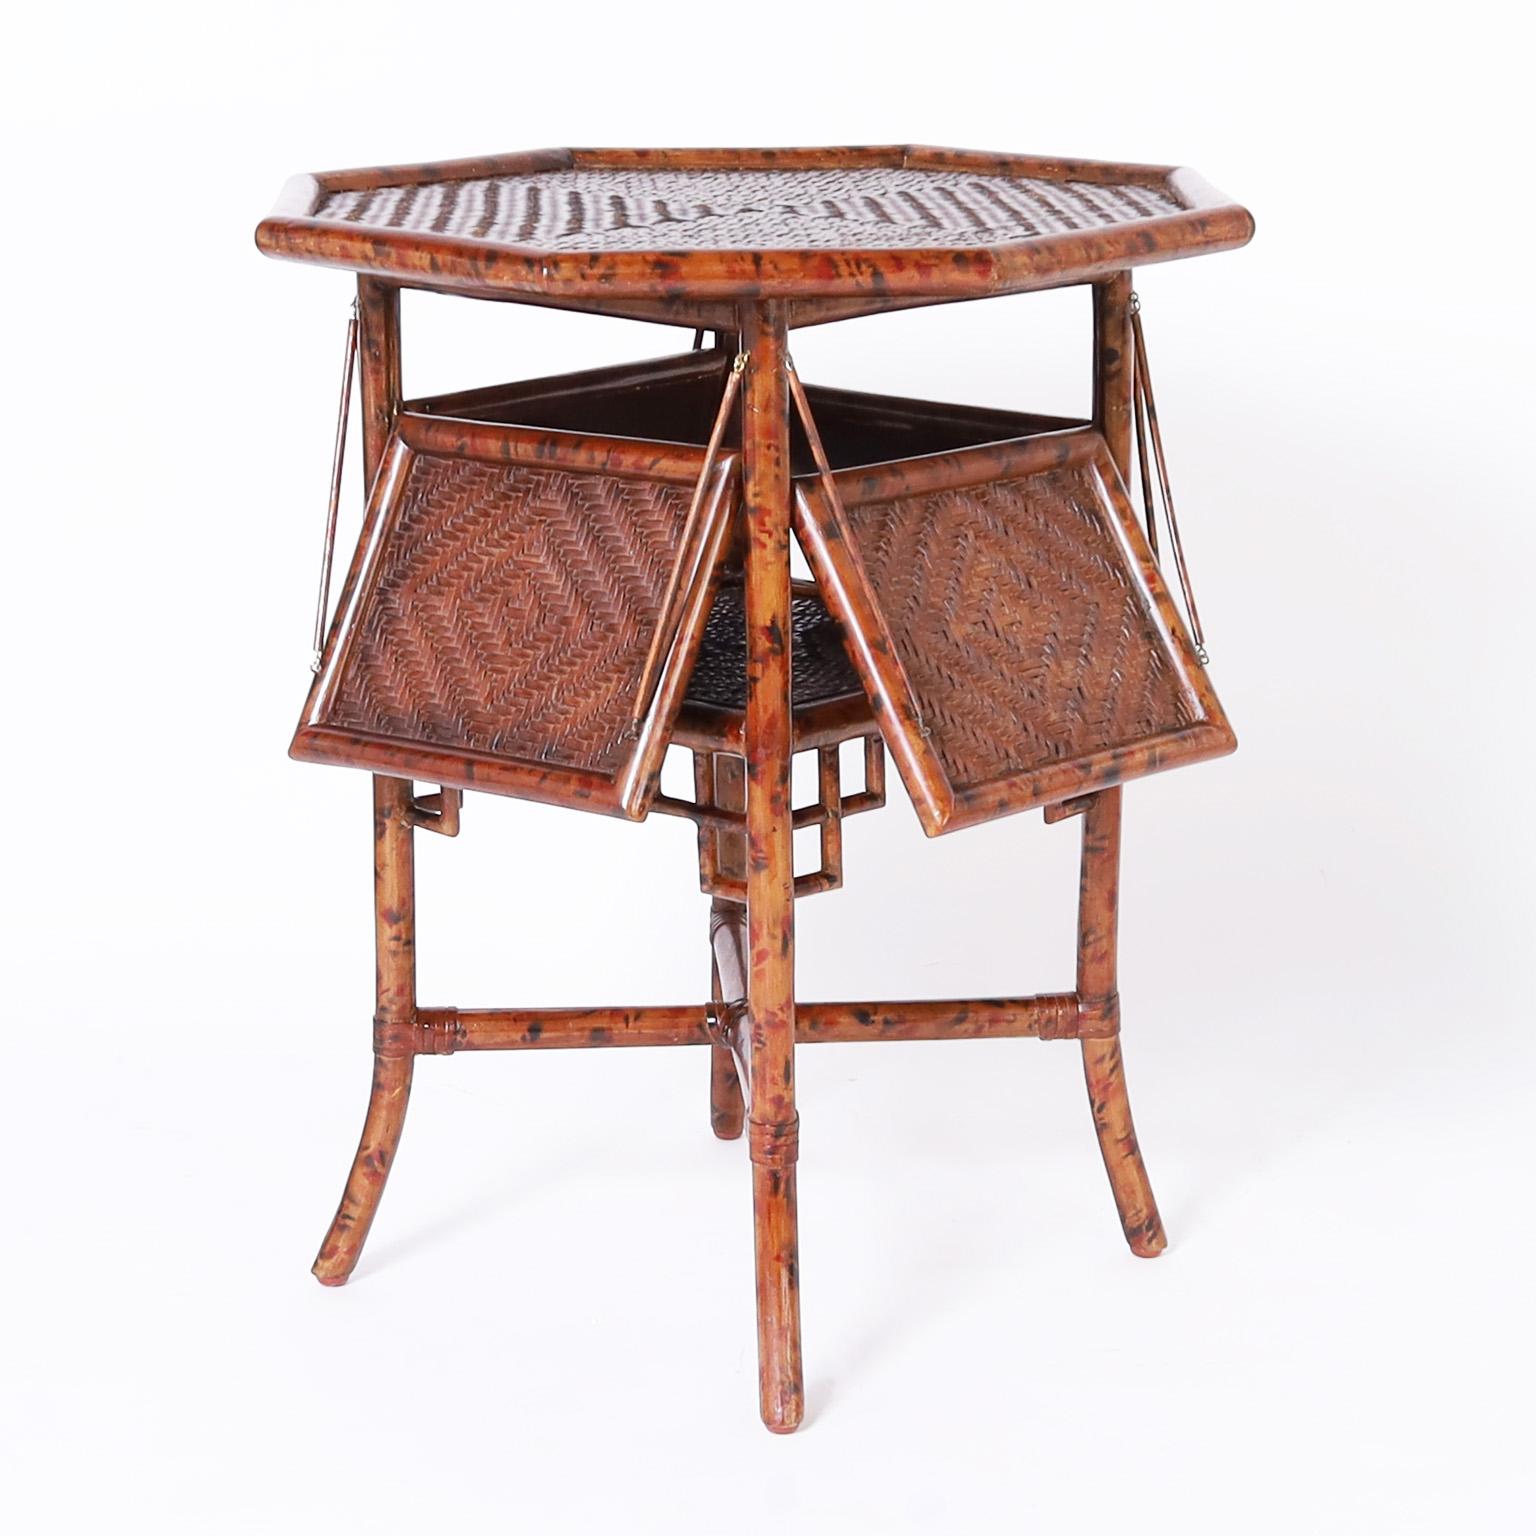 Handsome octagon form table crafted with faux bamboo having a faux tortoise finish and herringbone woven grasscloth on top and on the foldout plateaus. The base has Asian style brackets, cross stretchers, and splayed legs. 

Width with open: